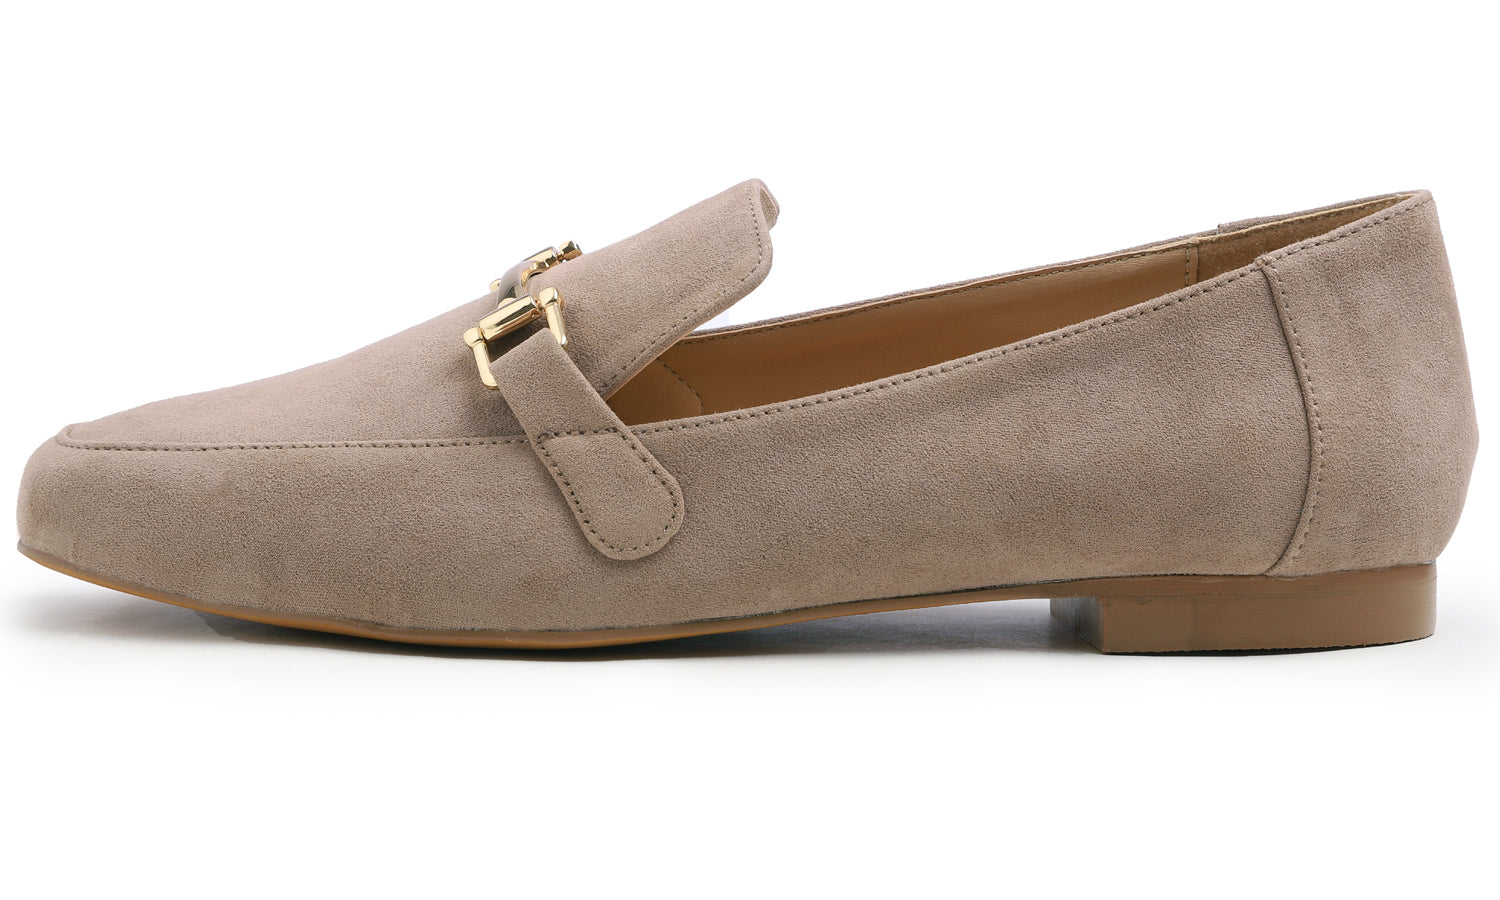 Feversole Women's Fashion Trim Deco Loafer Flats Dark Taupe Faux Suede